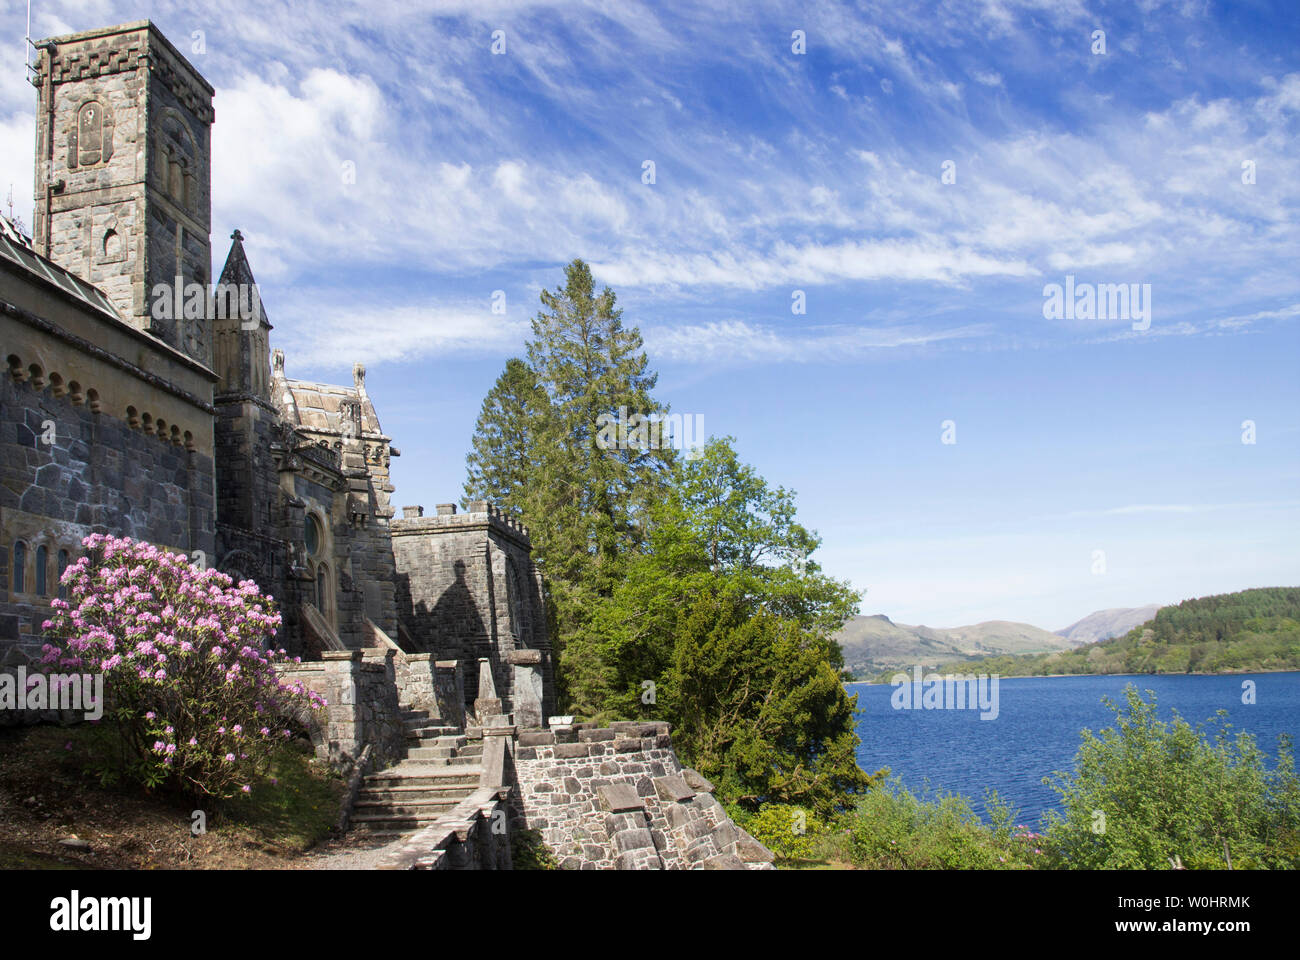 St Conan's Kirk on the shore of Loch Awe, Argyll and Bute, Scotland. Stock Photo